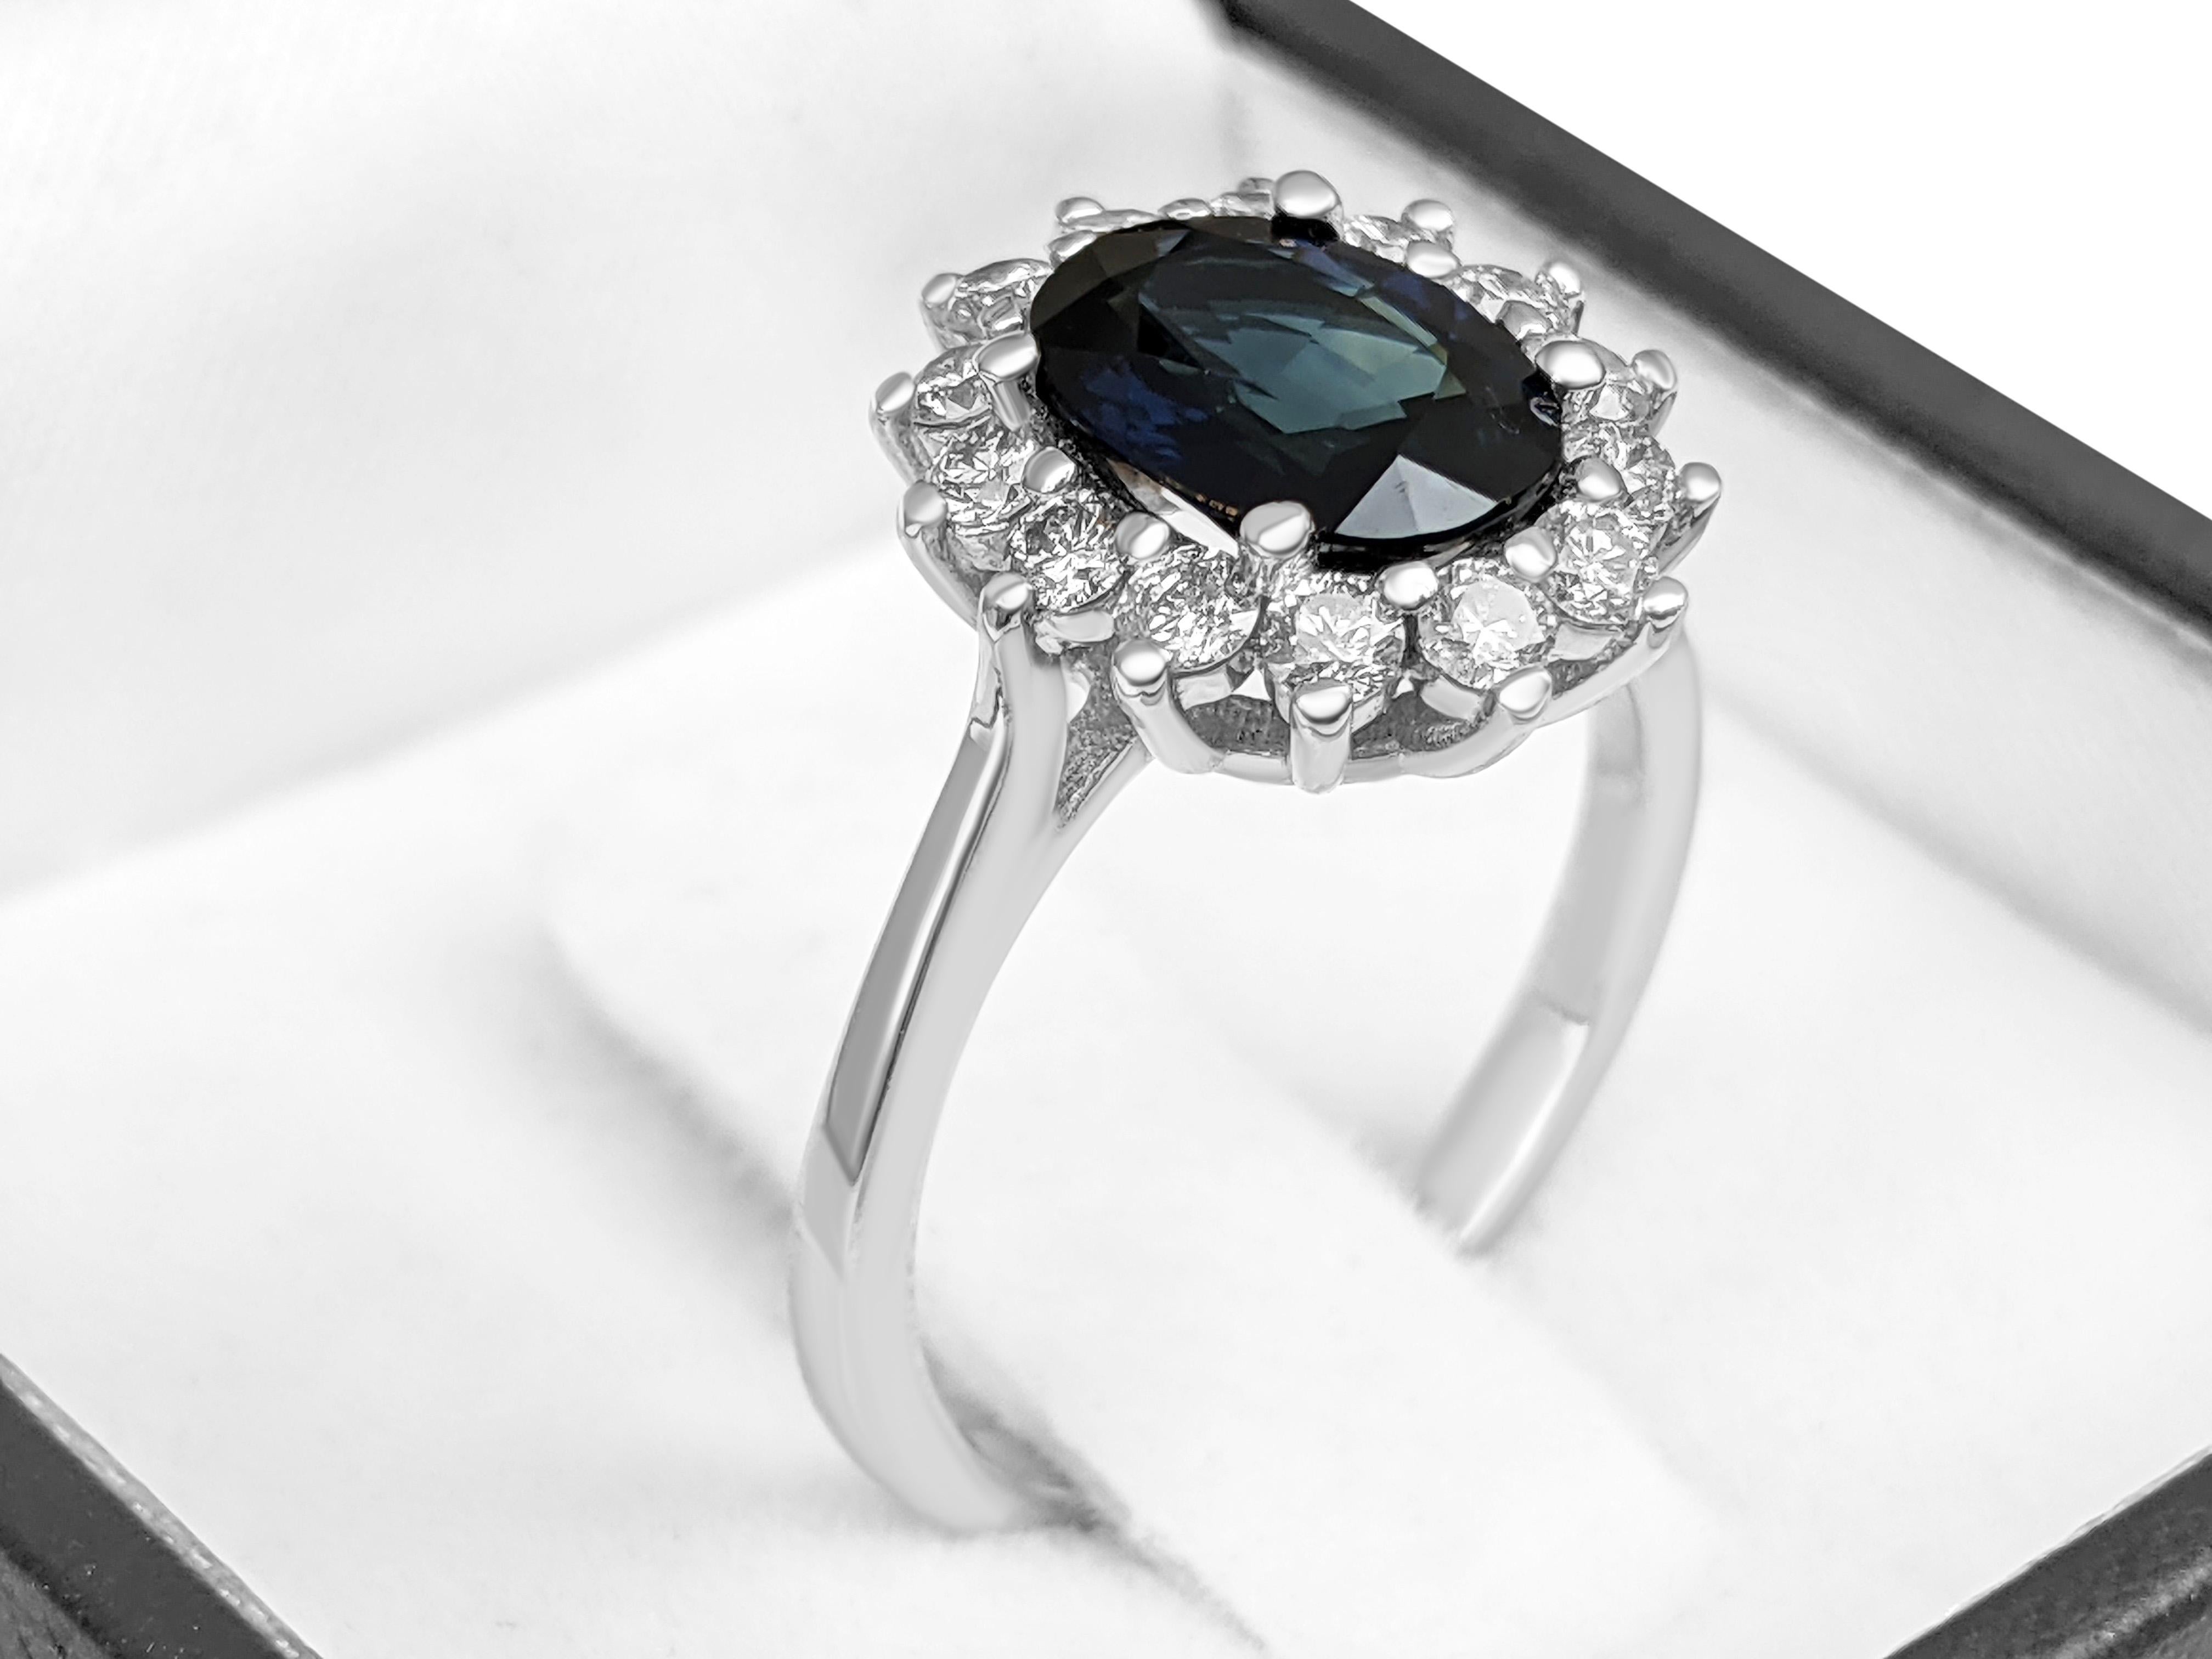 Oval Cut $1 No Reserve! - 1.99 Carat Sapphire and 0.50ct Diamonds, 14kt White Gold Ring